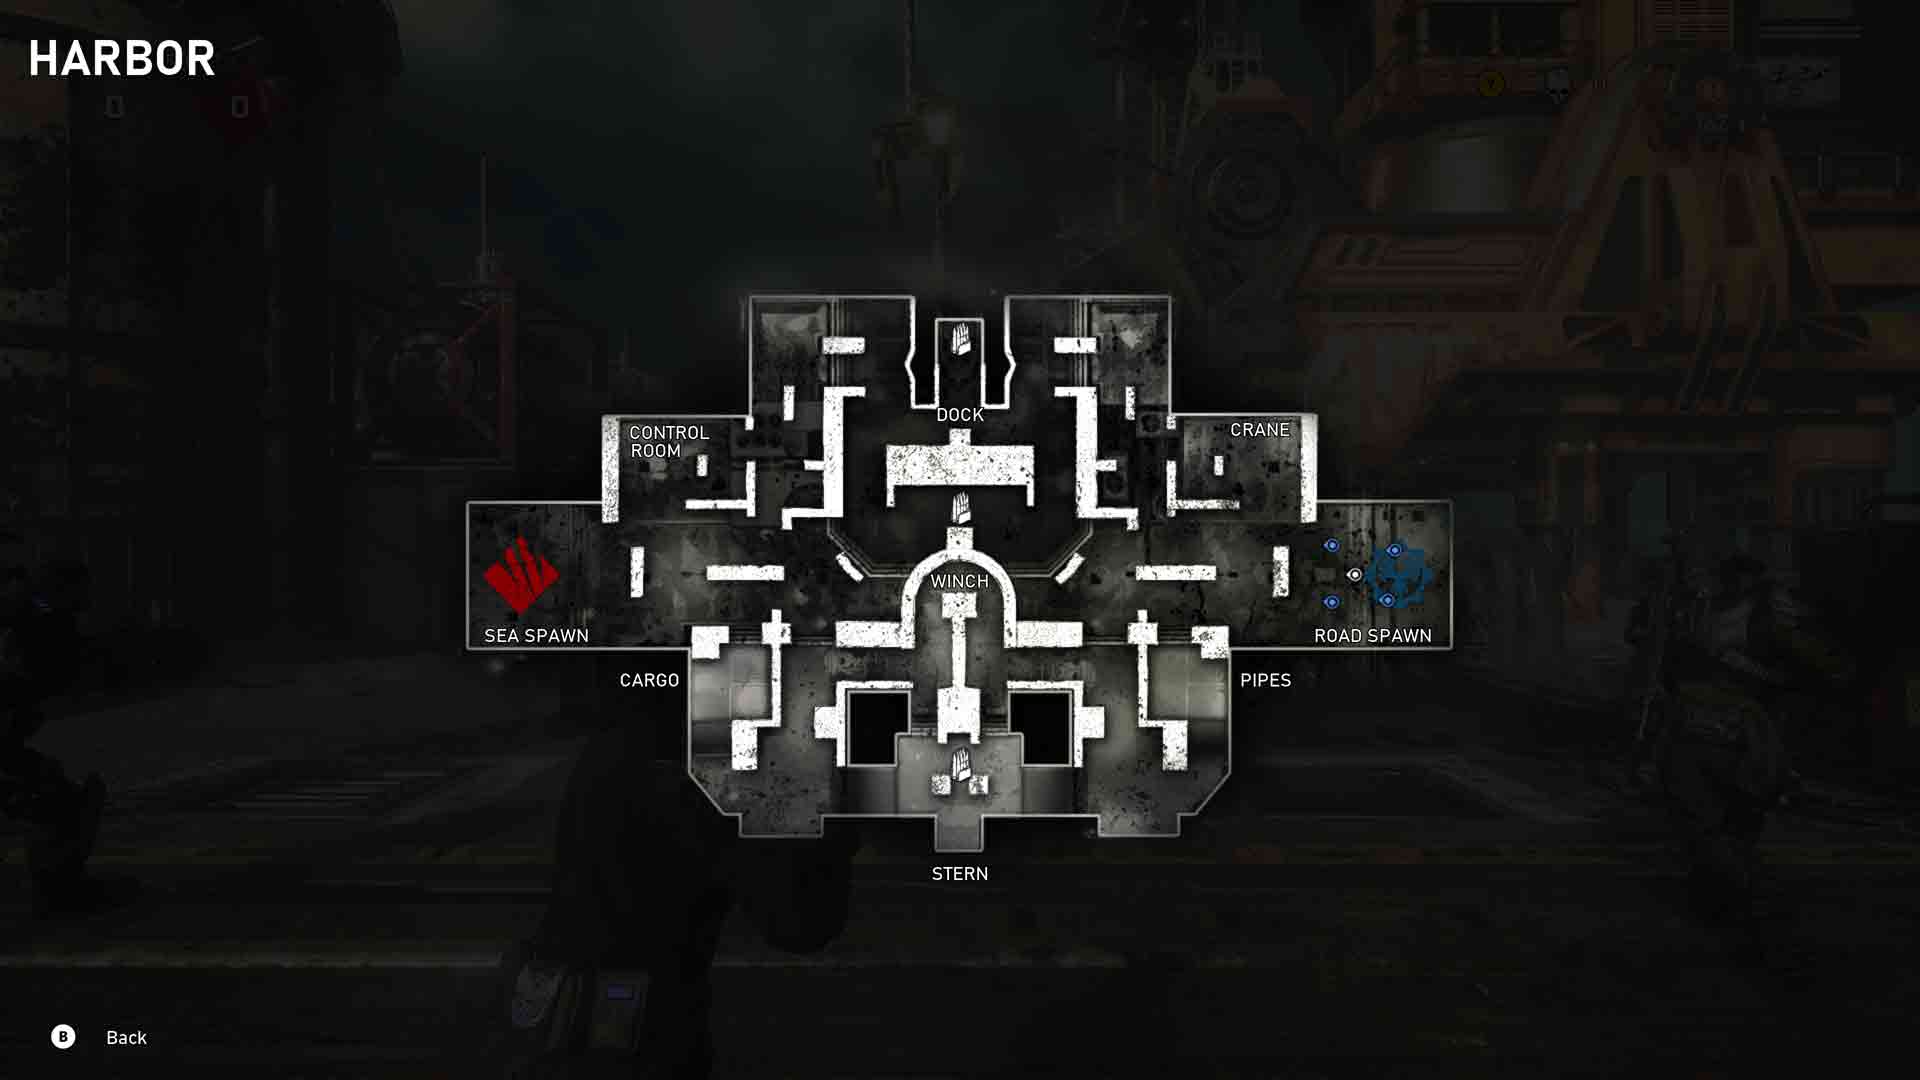 Gears 5: Harbor Map Layout